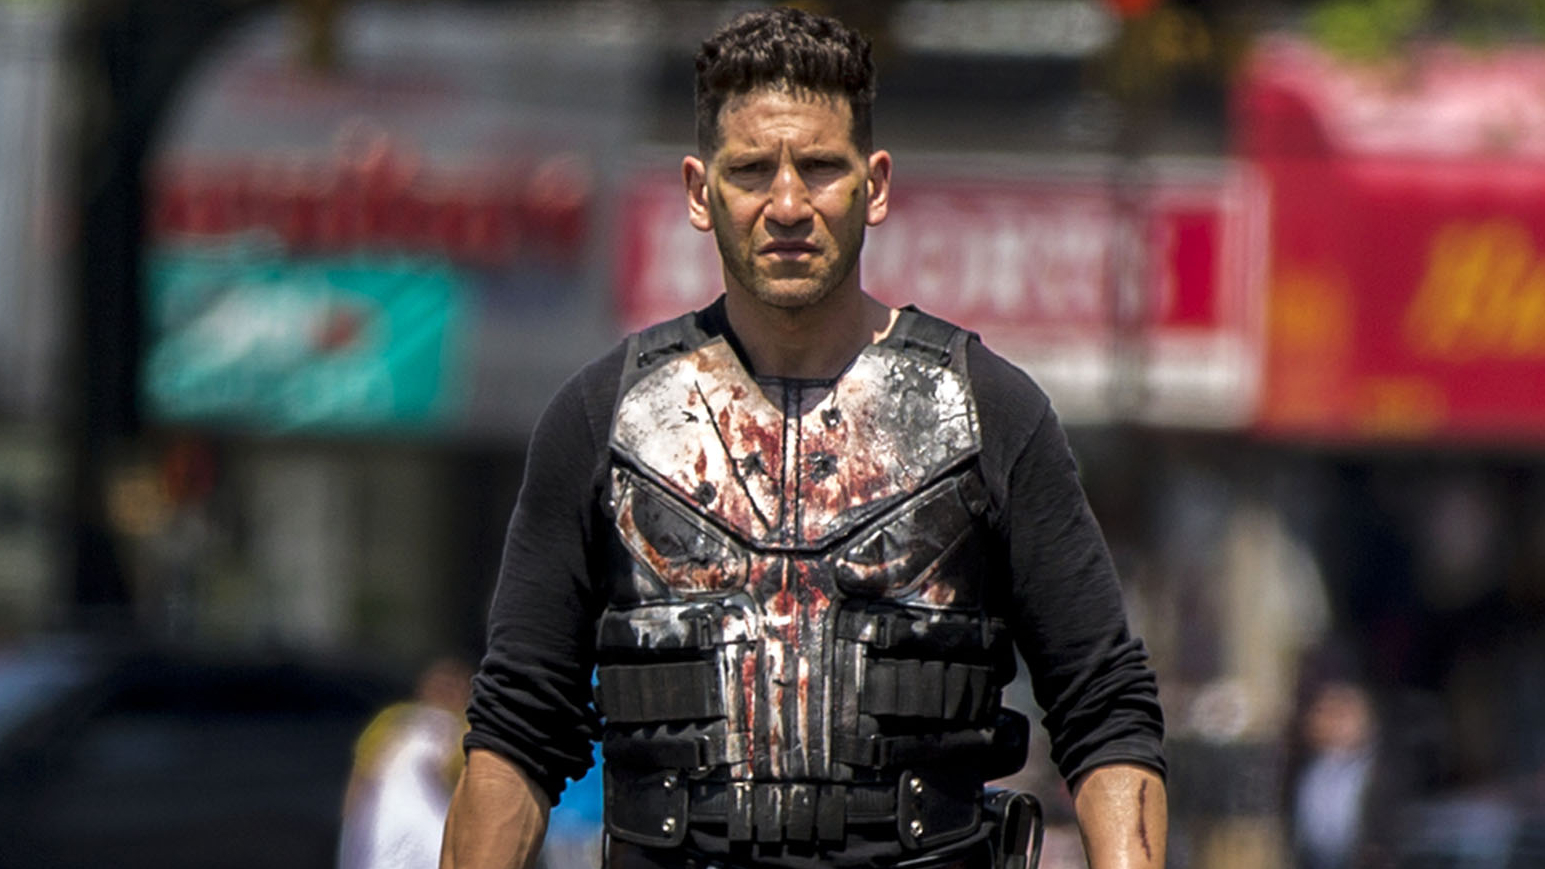 The Punisher Reinvented? Why Marvel Has Made Frank Castle the